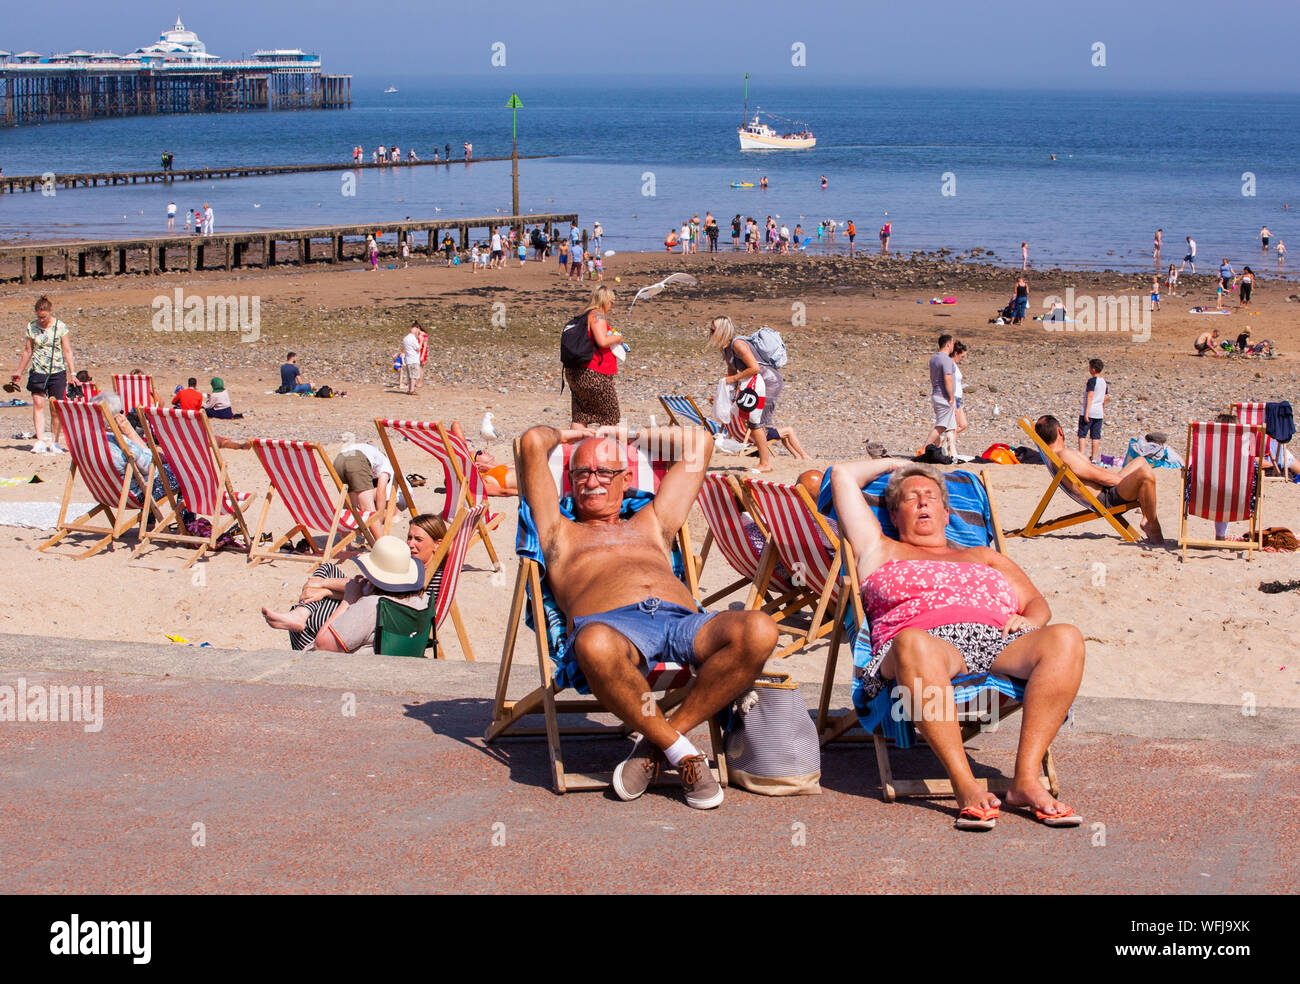 Elderly man and woman asleep in deckchairs on the promenade at the seaside resort of Llandudno North Walespeople Stock Photo